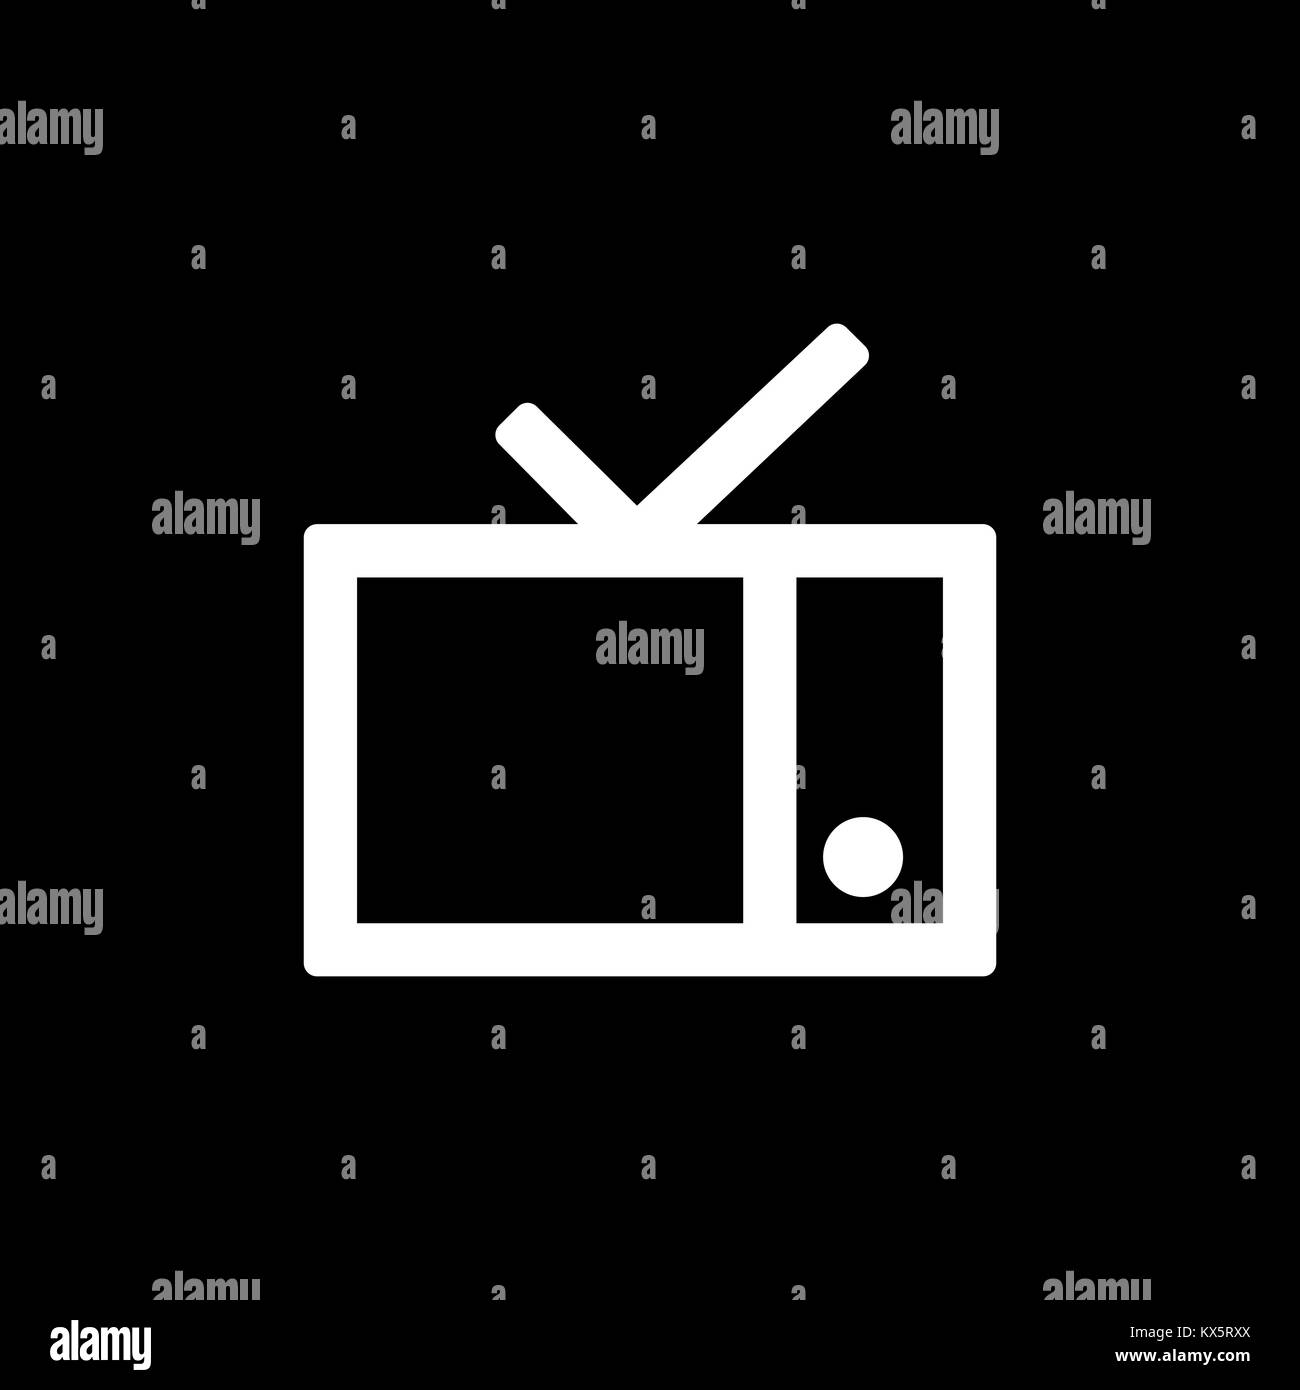 TV icon for simple flat style ui design. Stock Vector